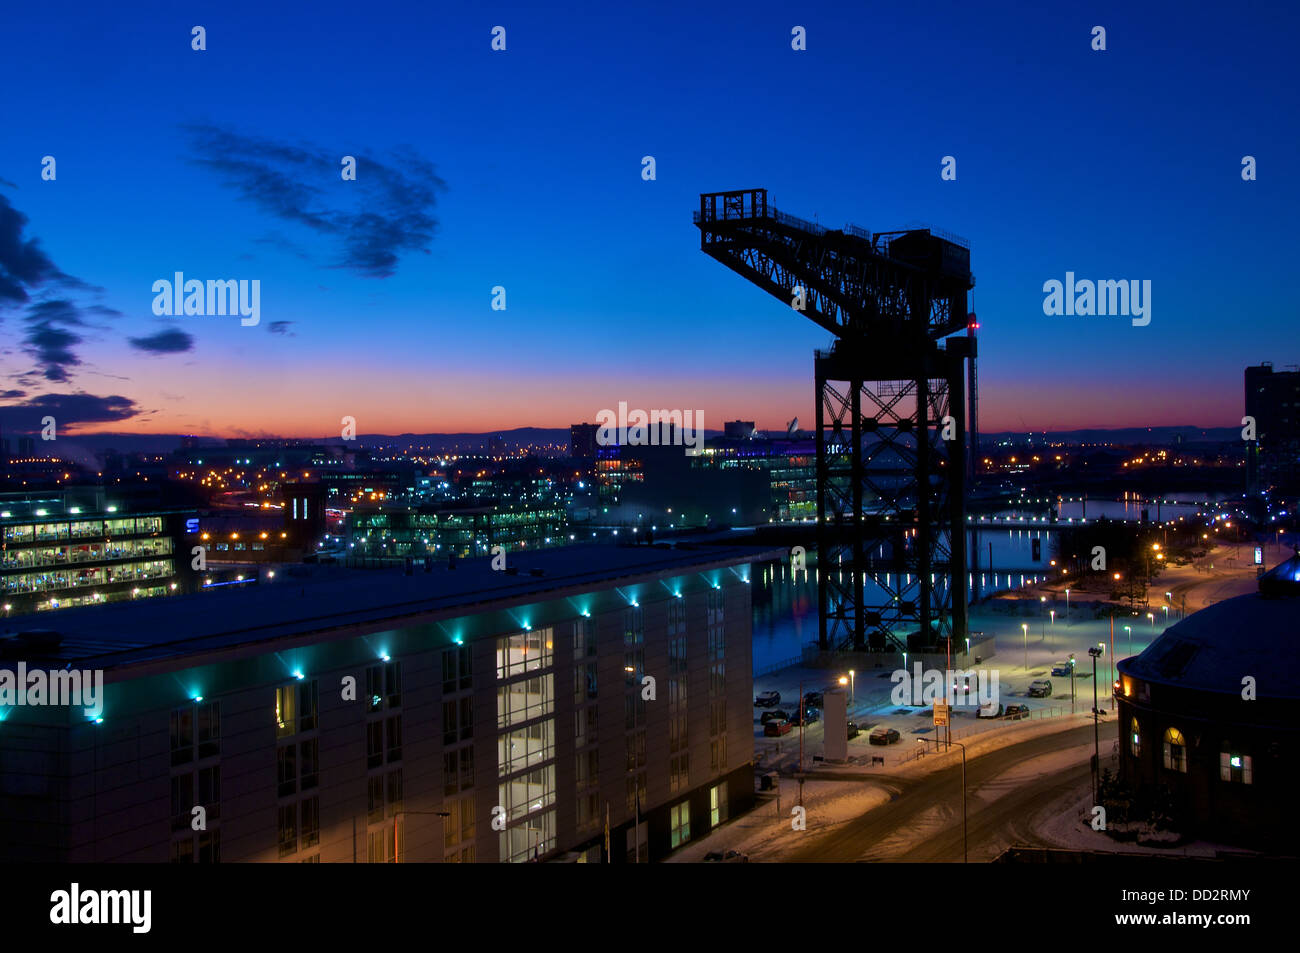 The Finnieston Crane sitting on the banks of the river Clyde is a landmark in Glasgow, Scotland Stock Photo